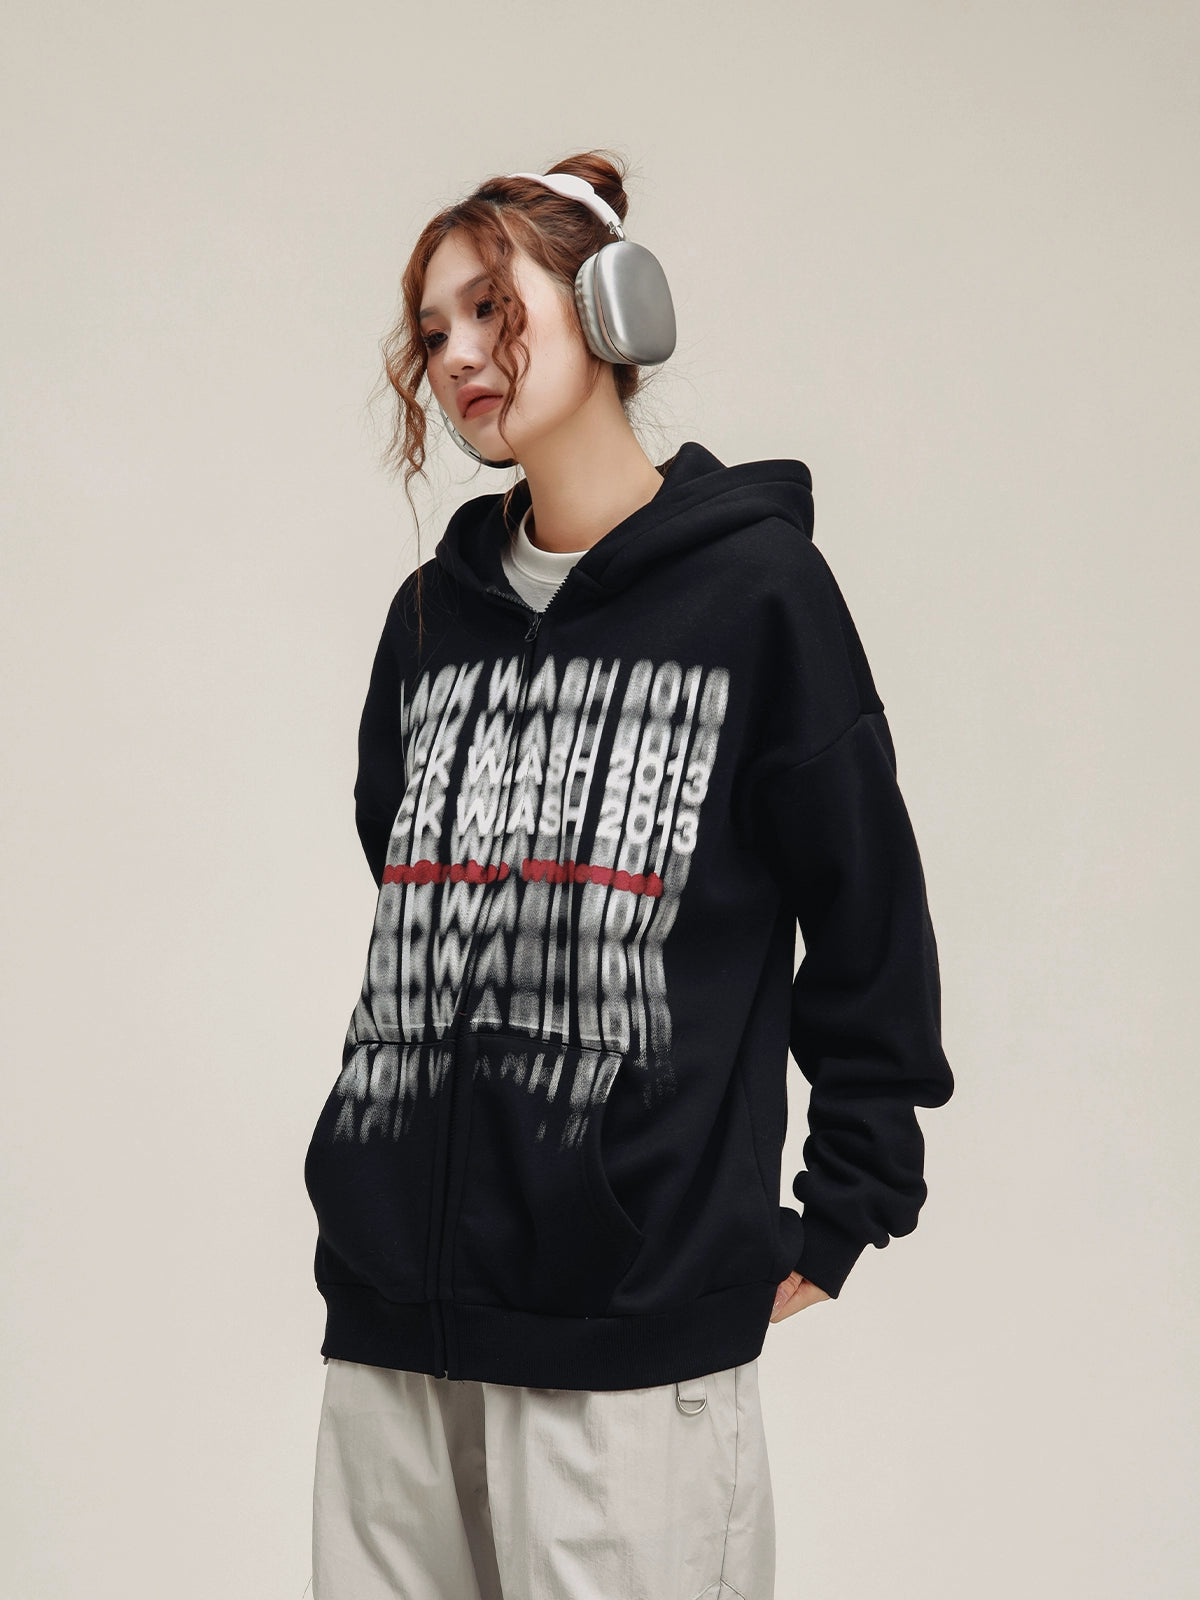 American high street letter gray hooded jacket